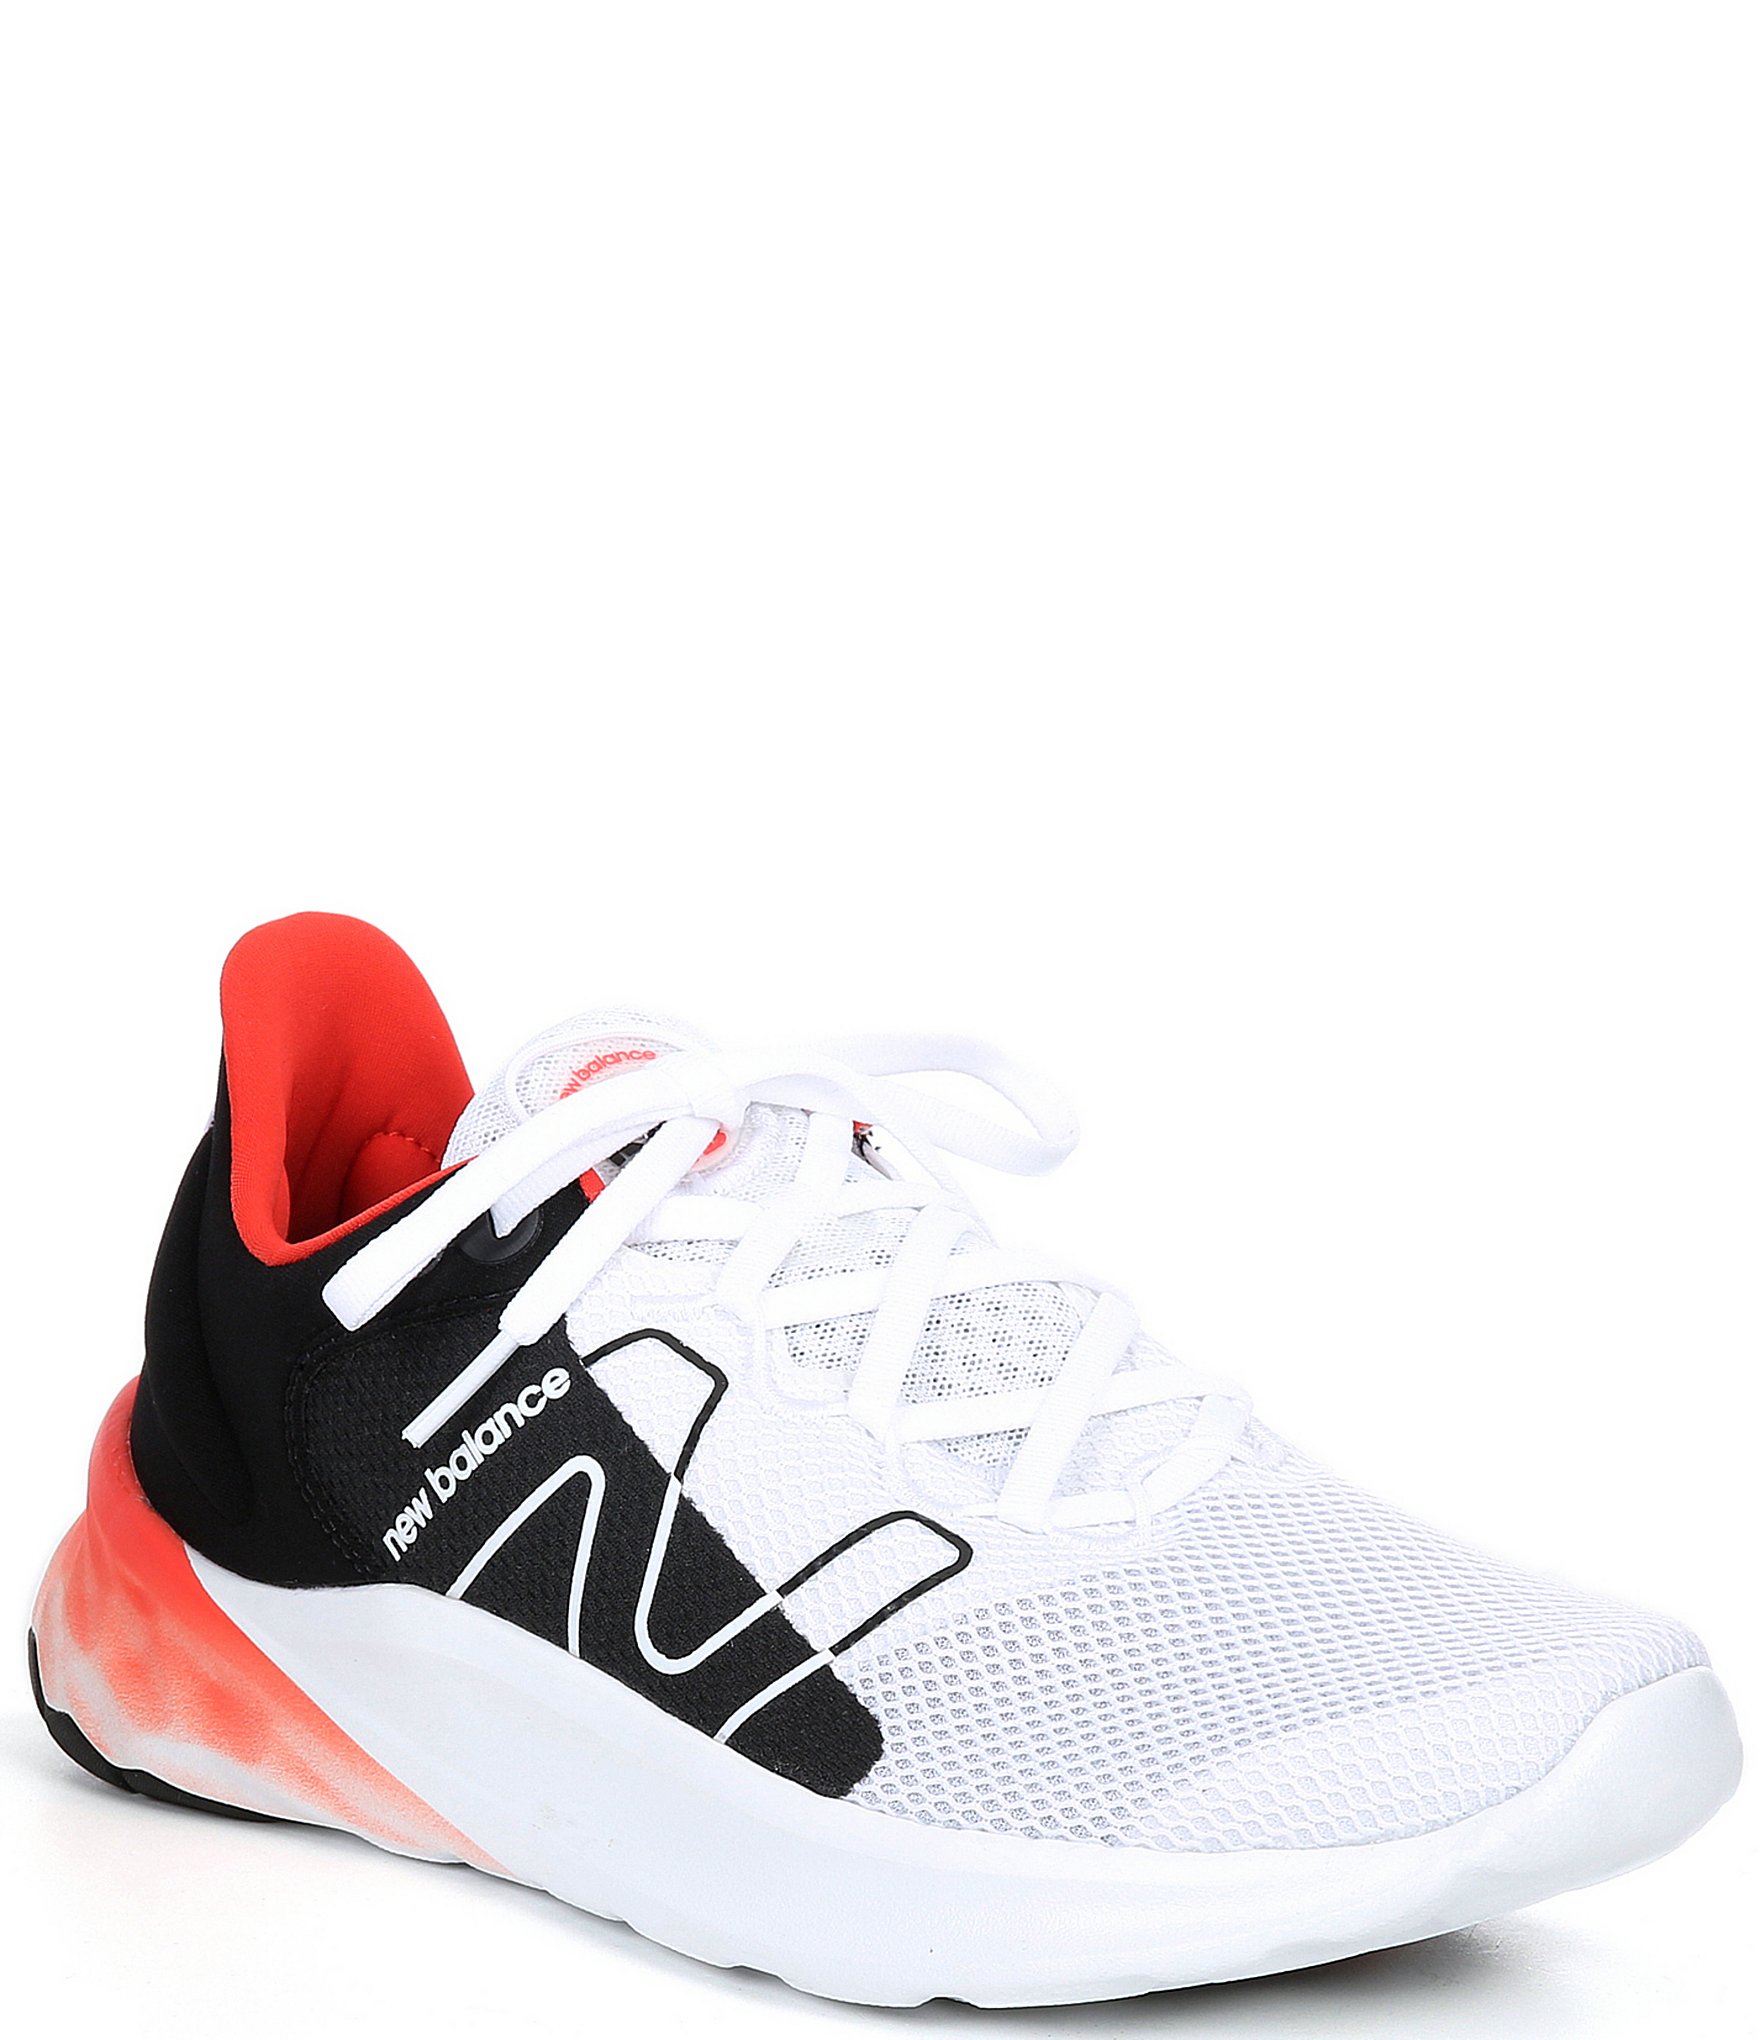 New Balance men's lace-up mesh sneakers